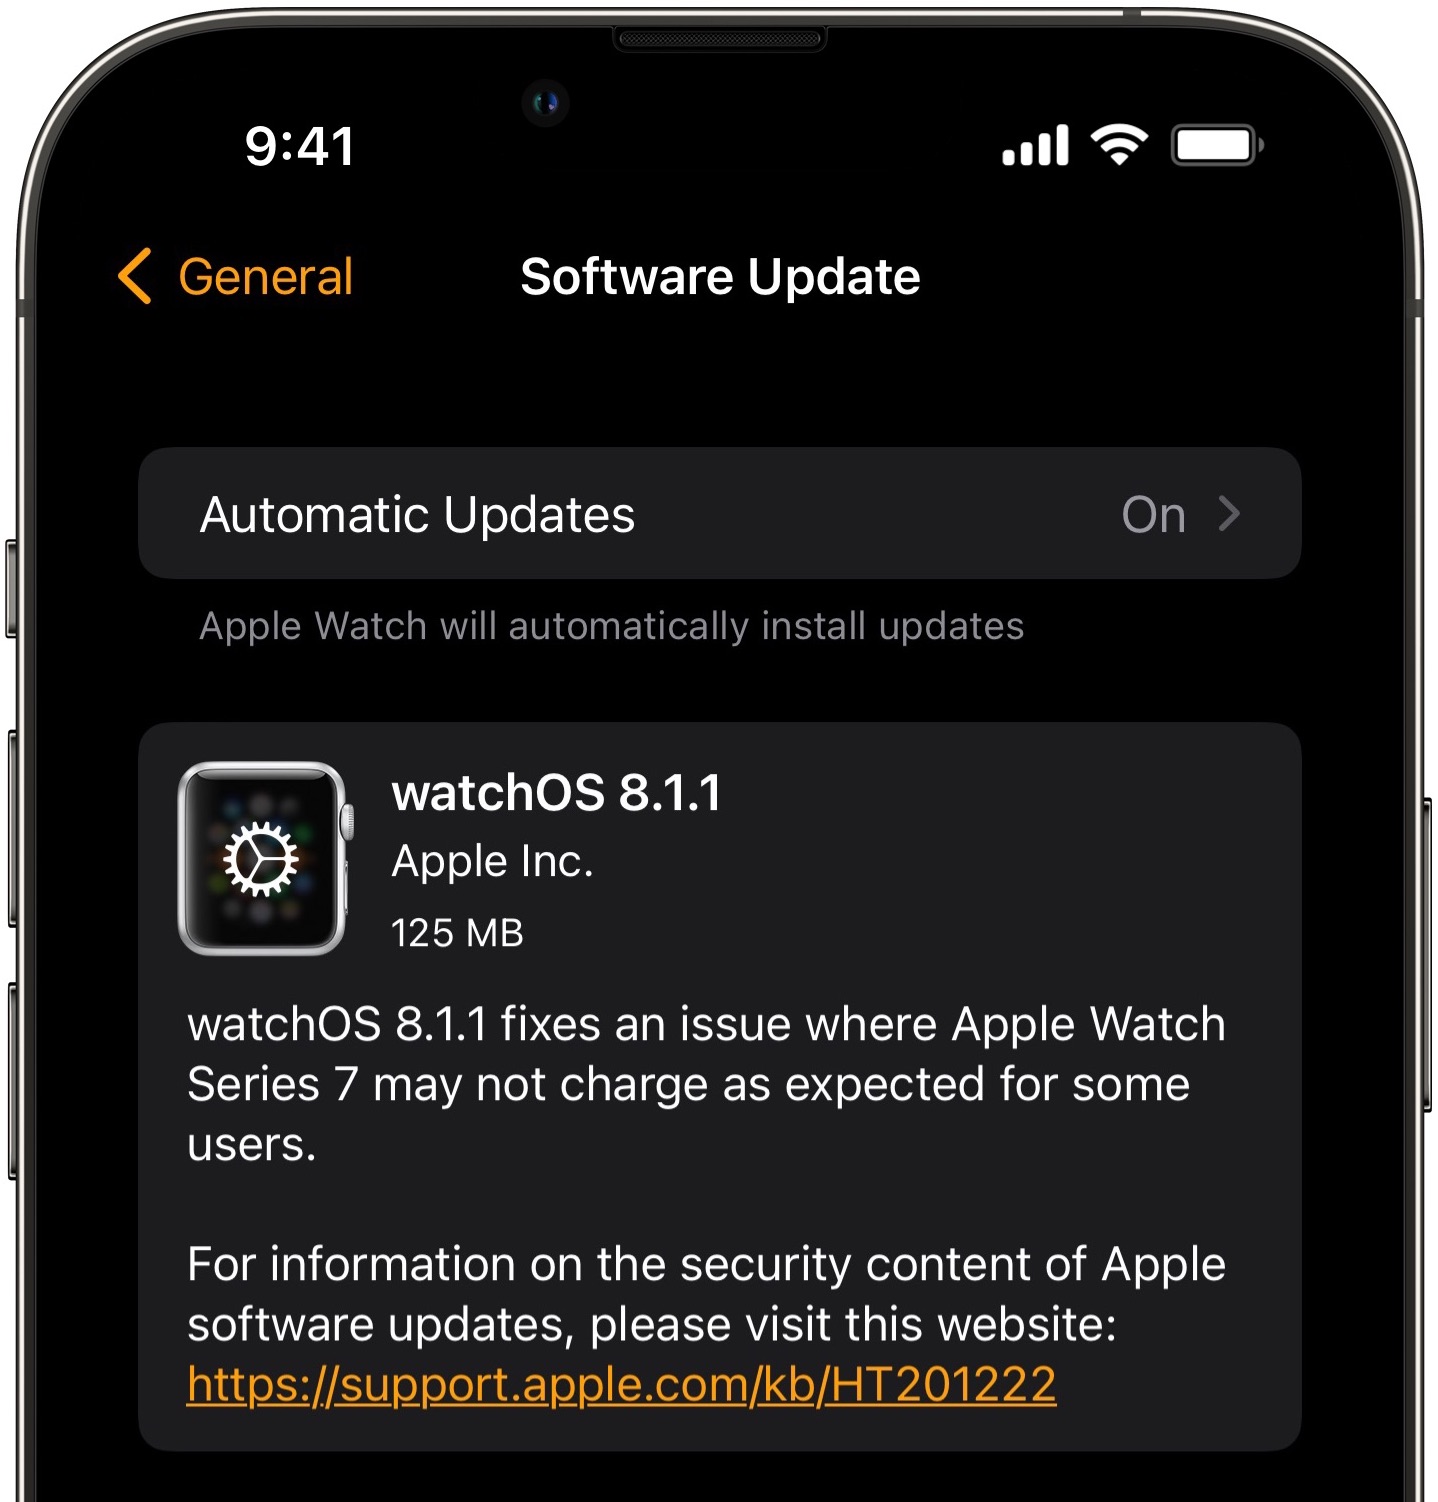 watchOS 8.1.1 Fixes Apple Watch Series 7 Charging Issues - TidBITS